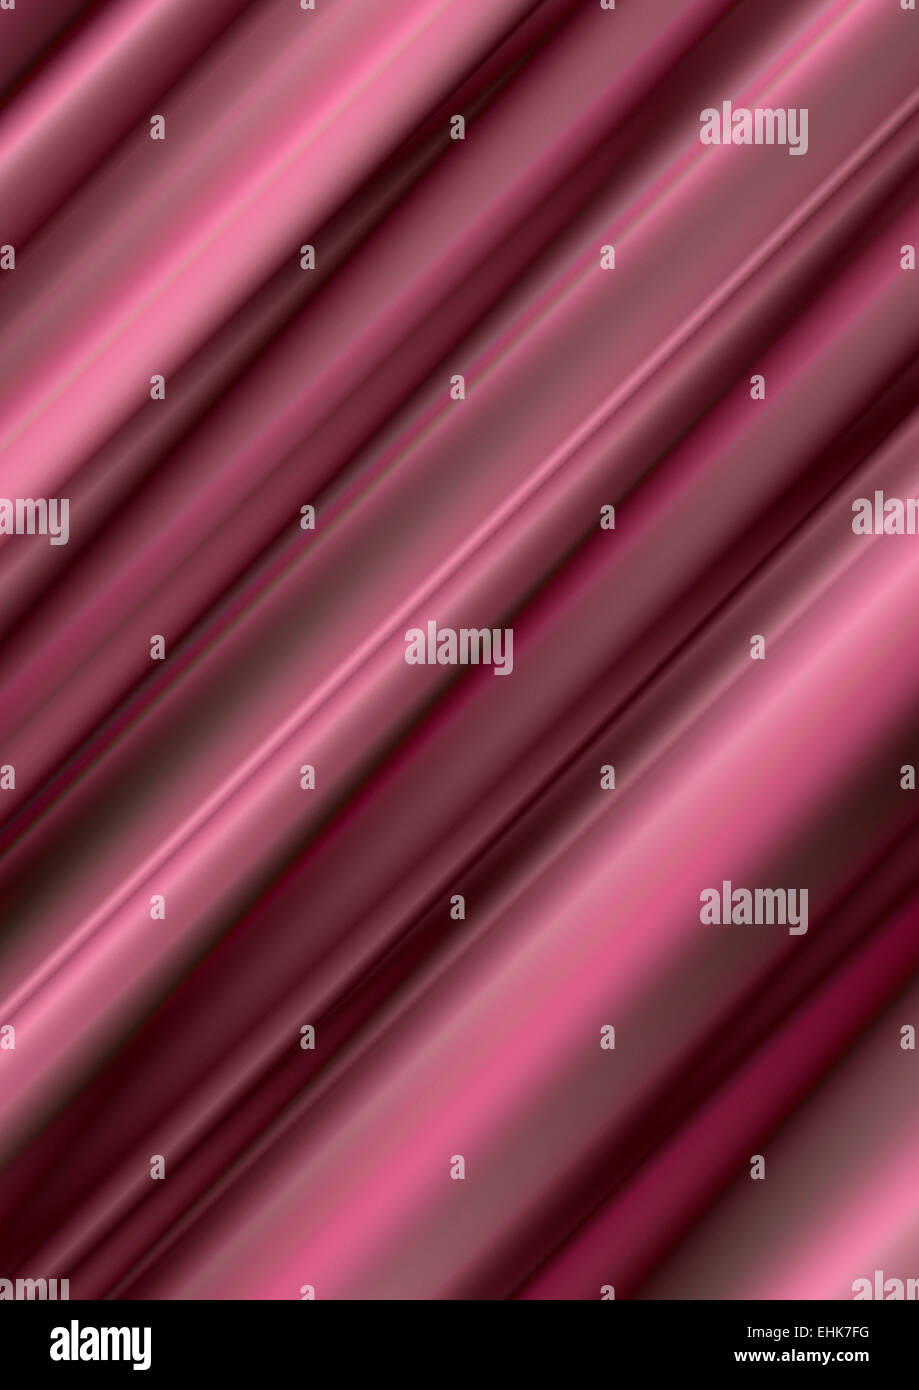 Convex bands with different shades of burgundy Stock Photo